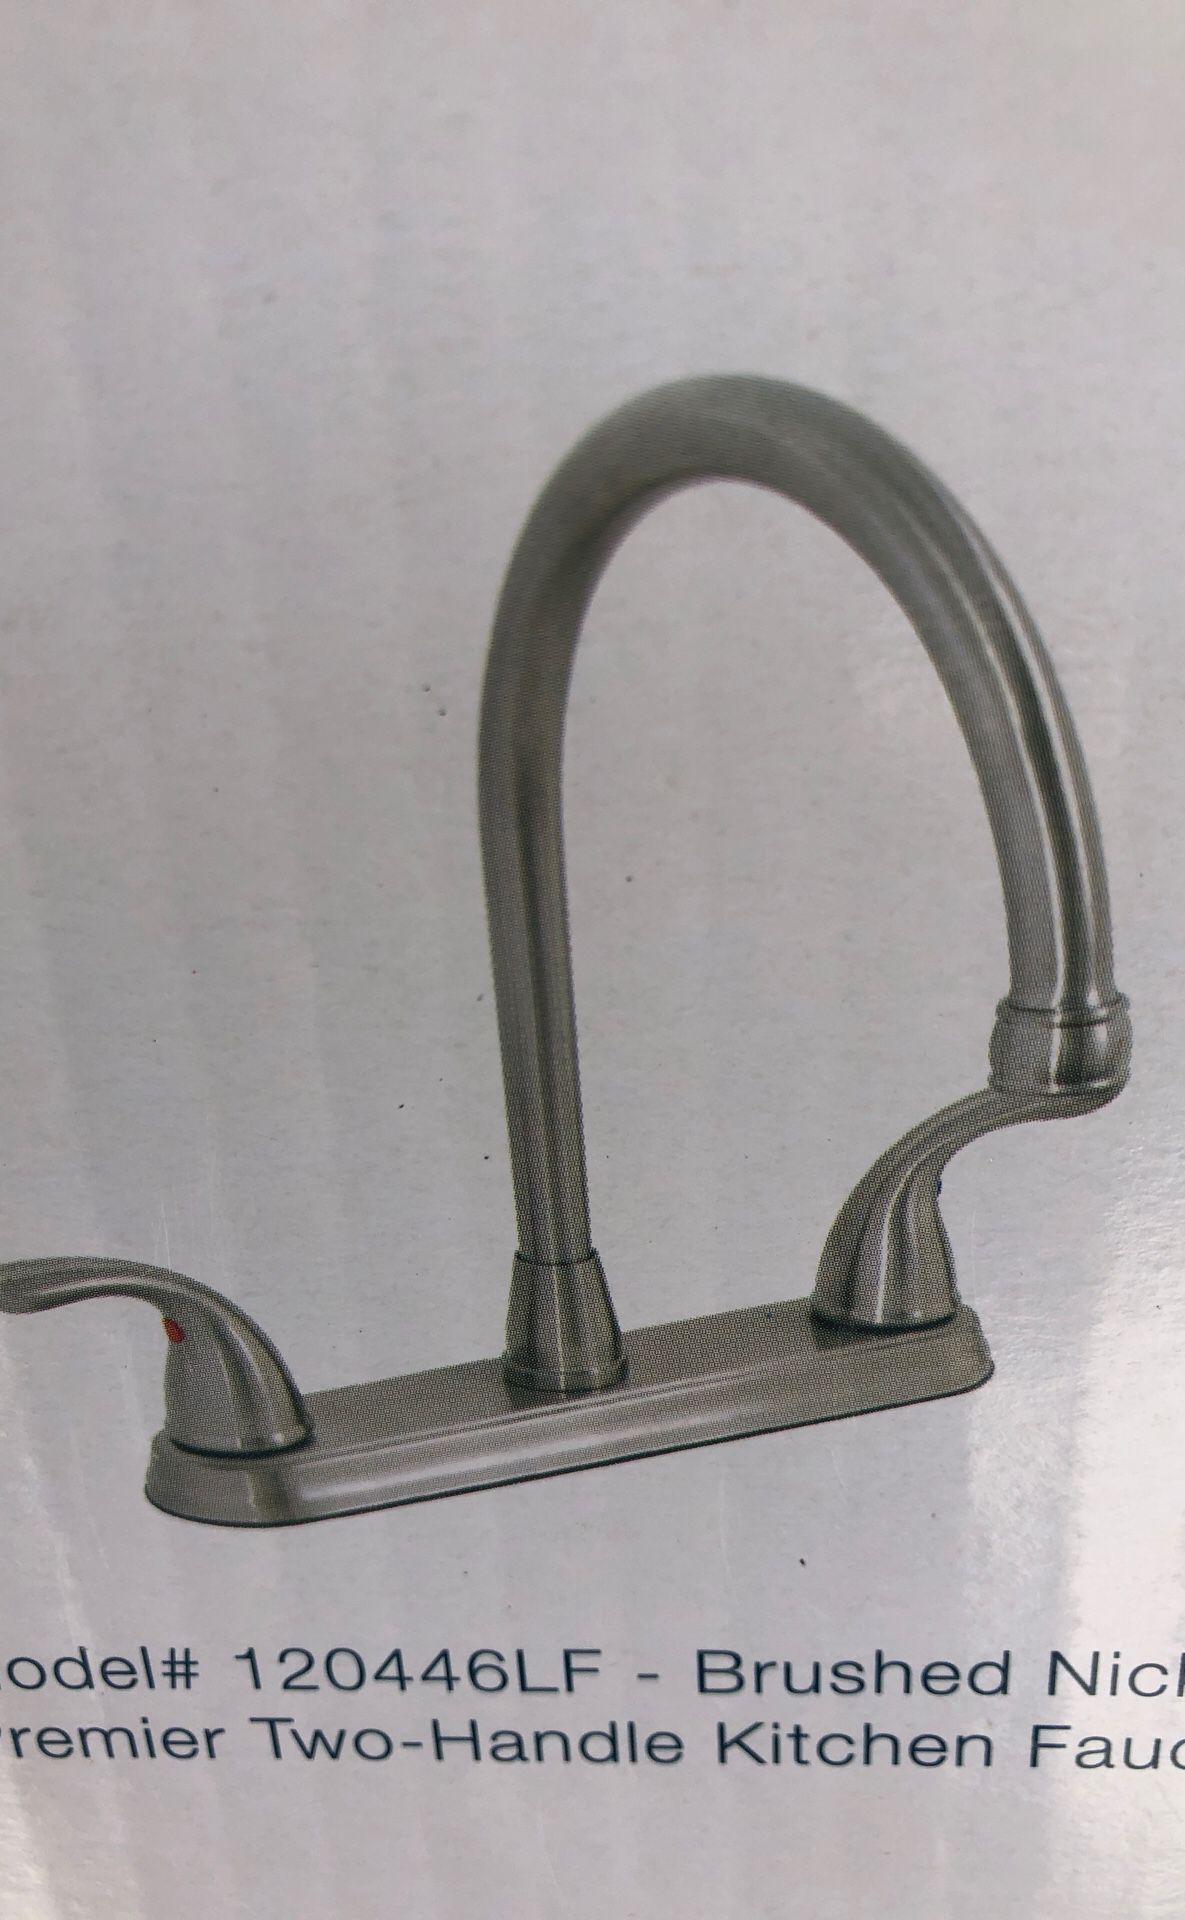 Brand new kitchen faucet